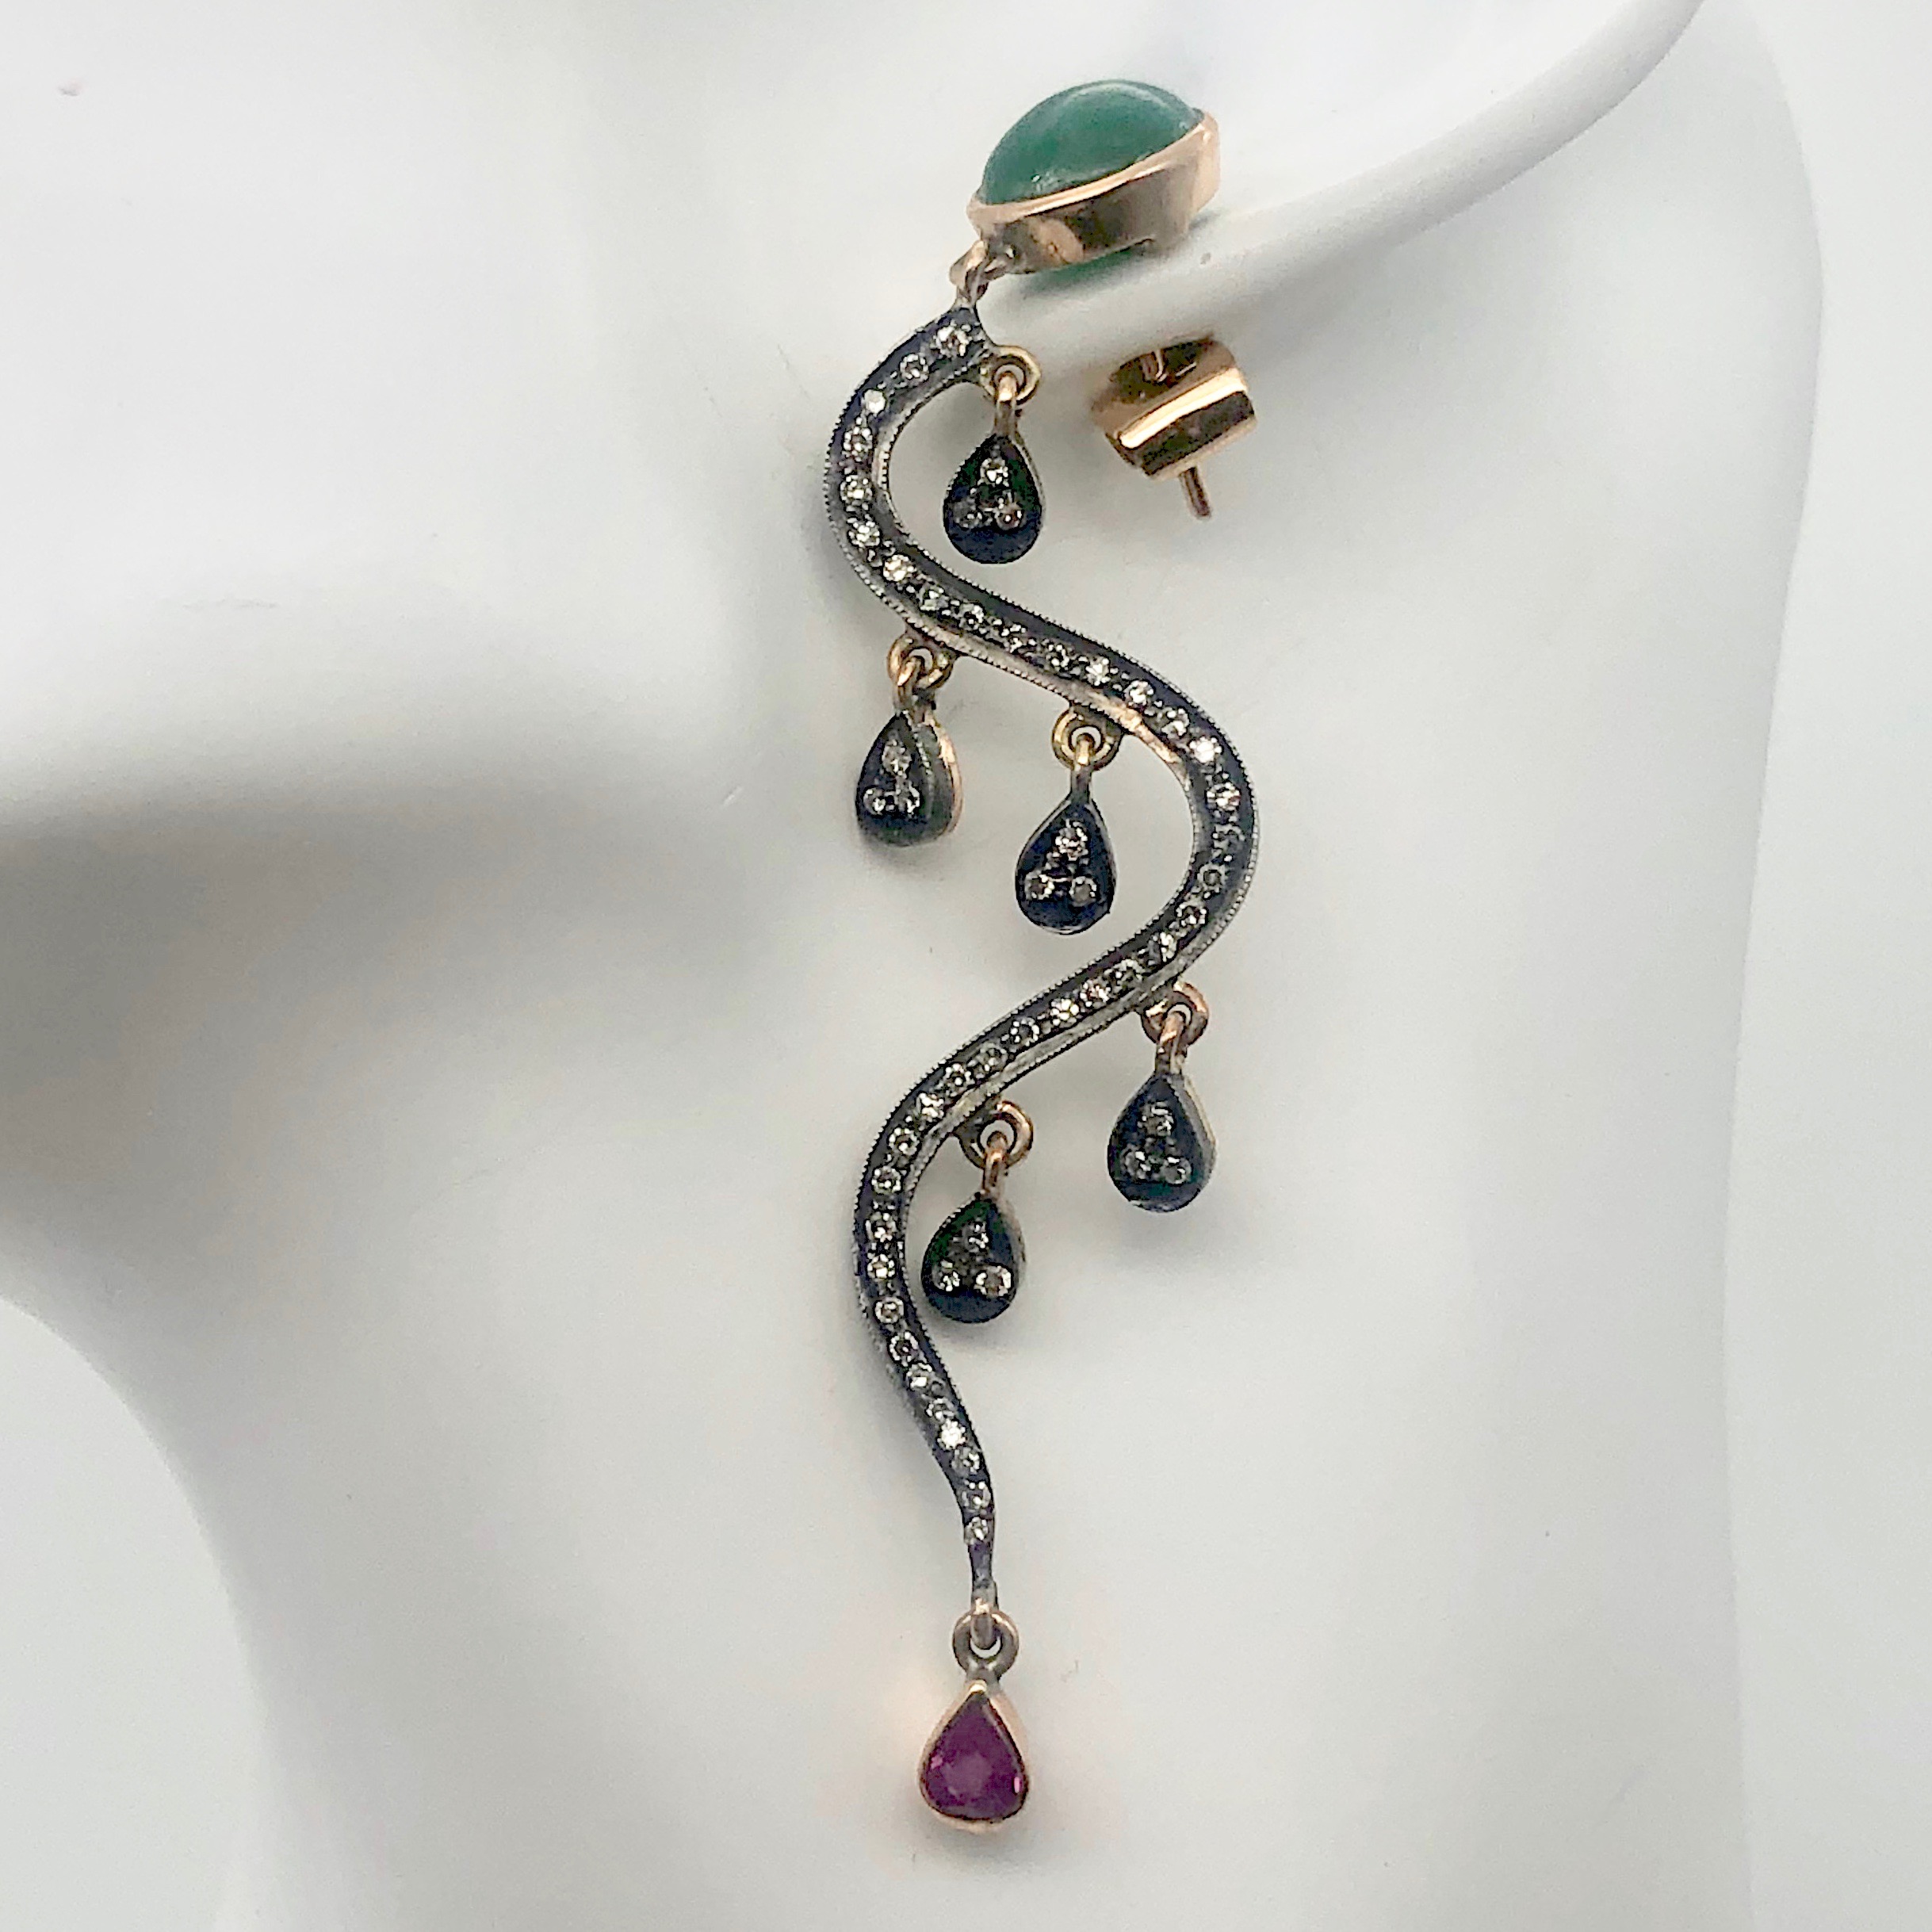 18Kt Gold Earrings Dripping W/ 108 Diamonds Pink Sapphire Emerald | 2.75 inches| - image 5 of 10